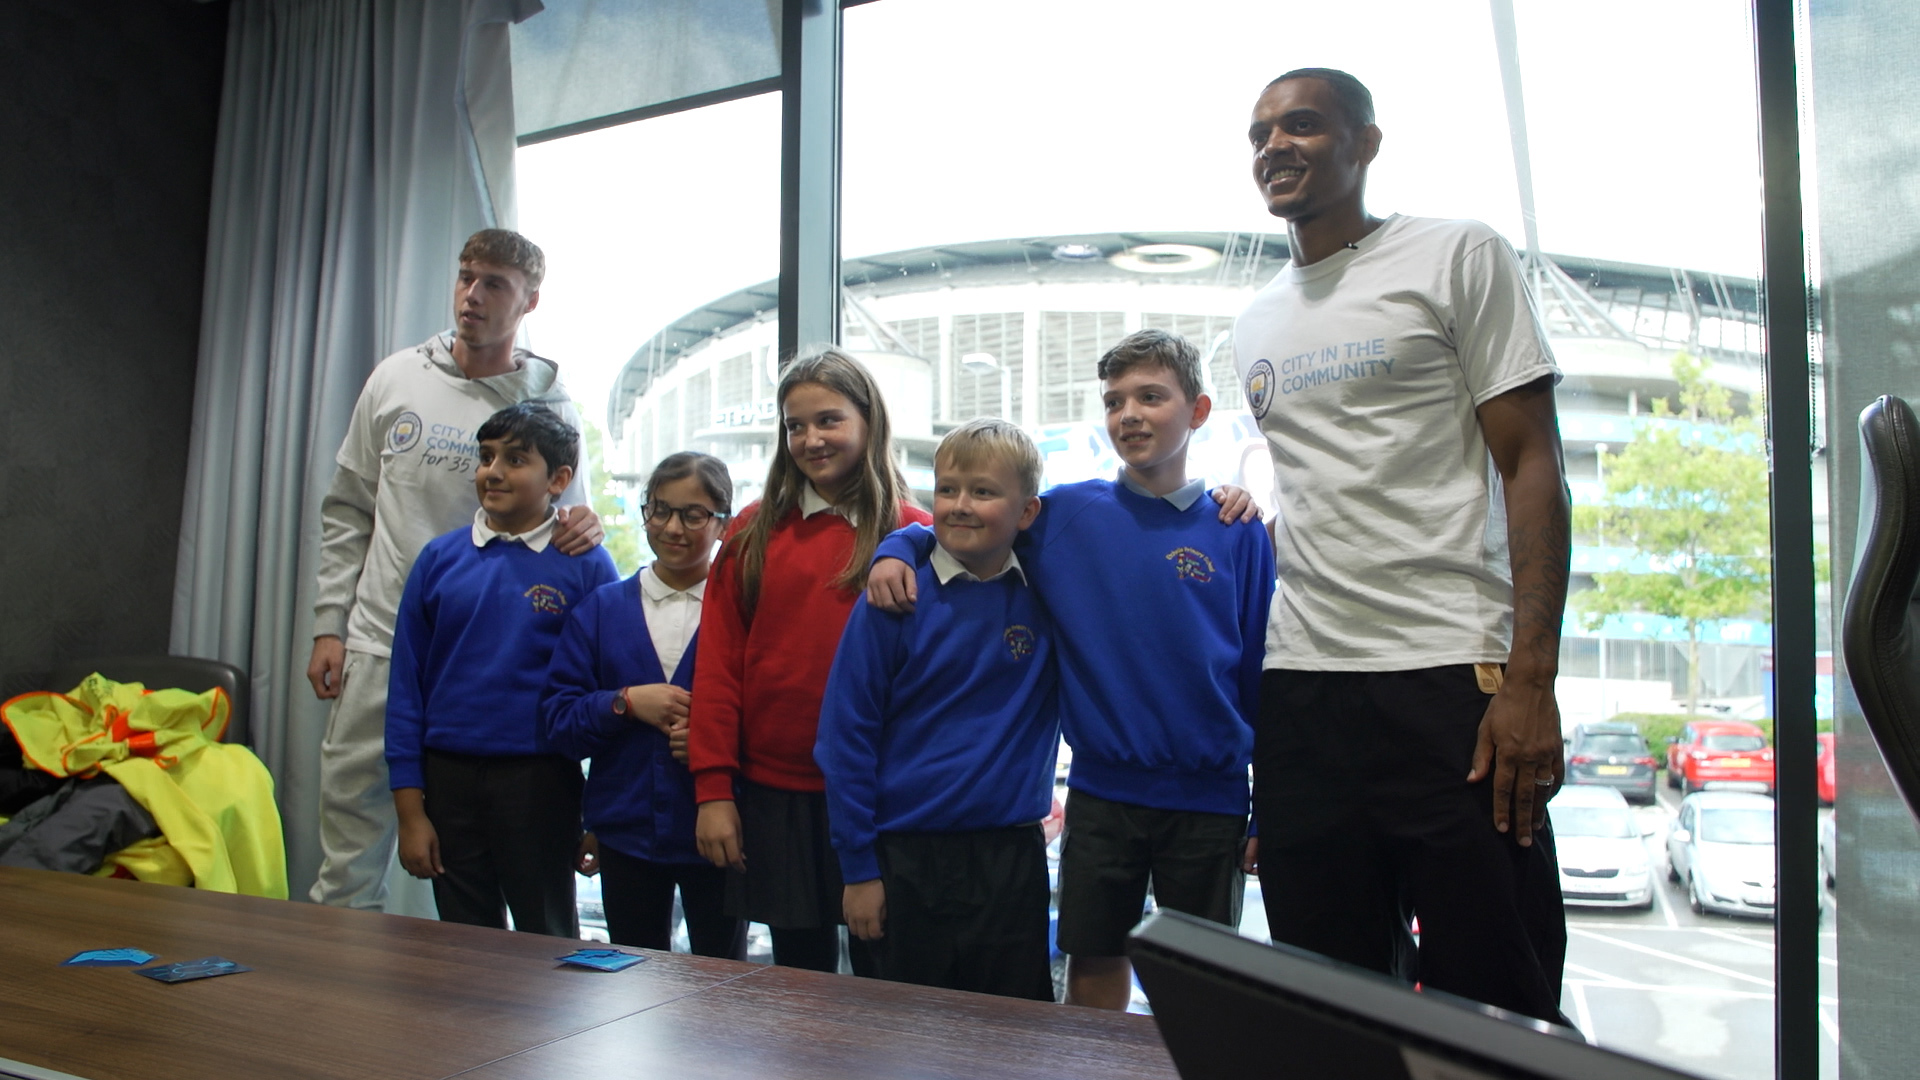 Palmer and Akanji surprise CITC youngsters for World Children's Day